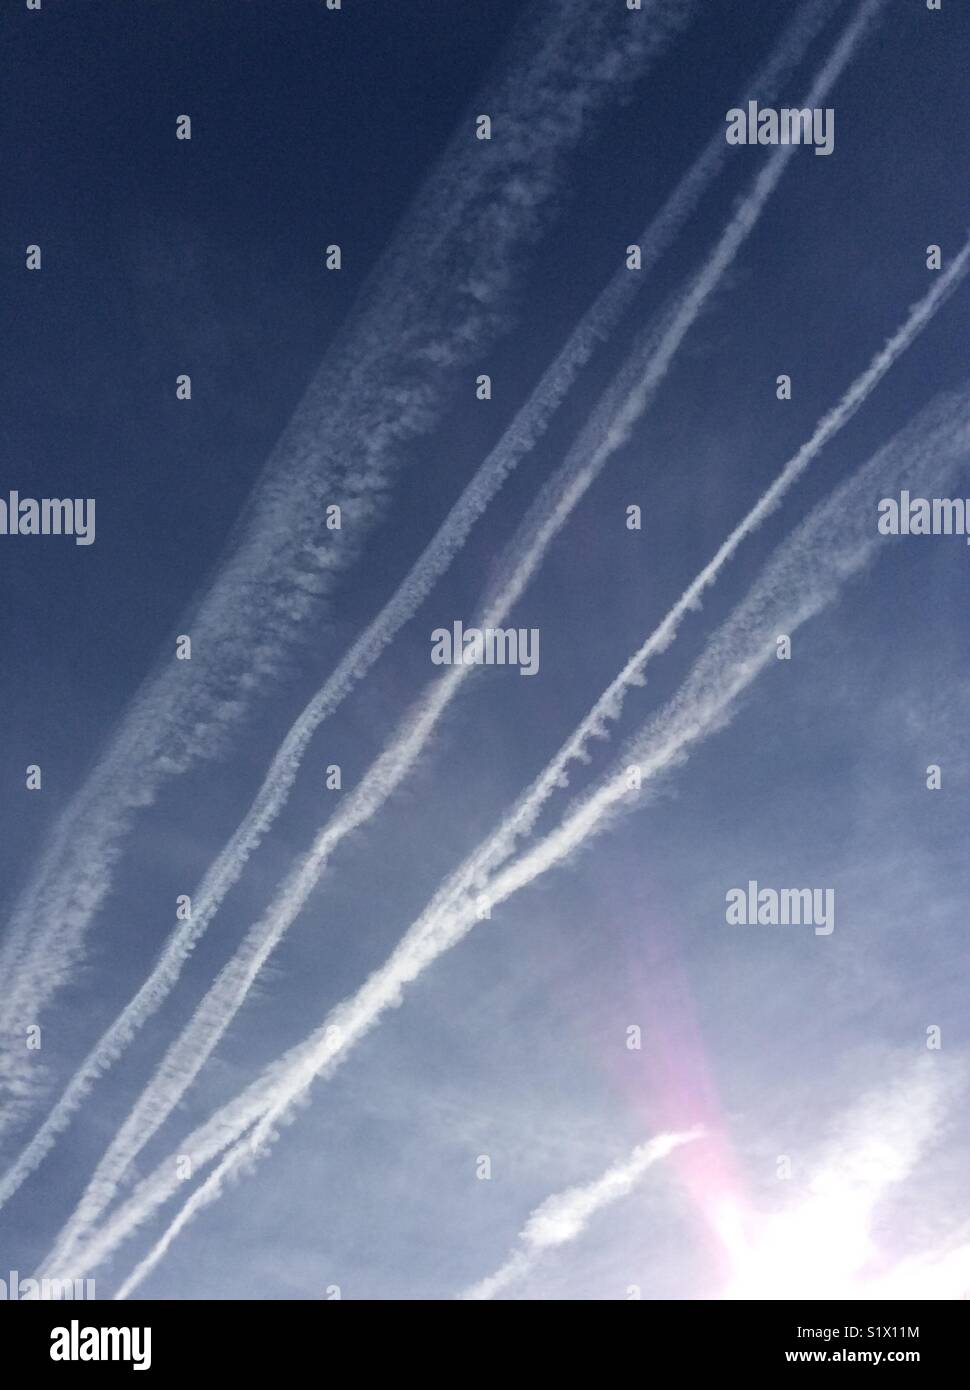 Chemtrails in sky Stock Photo